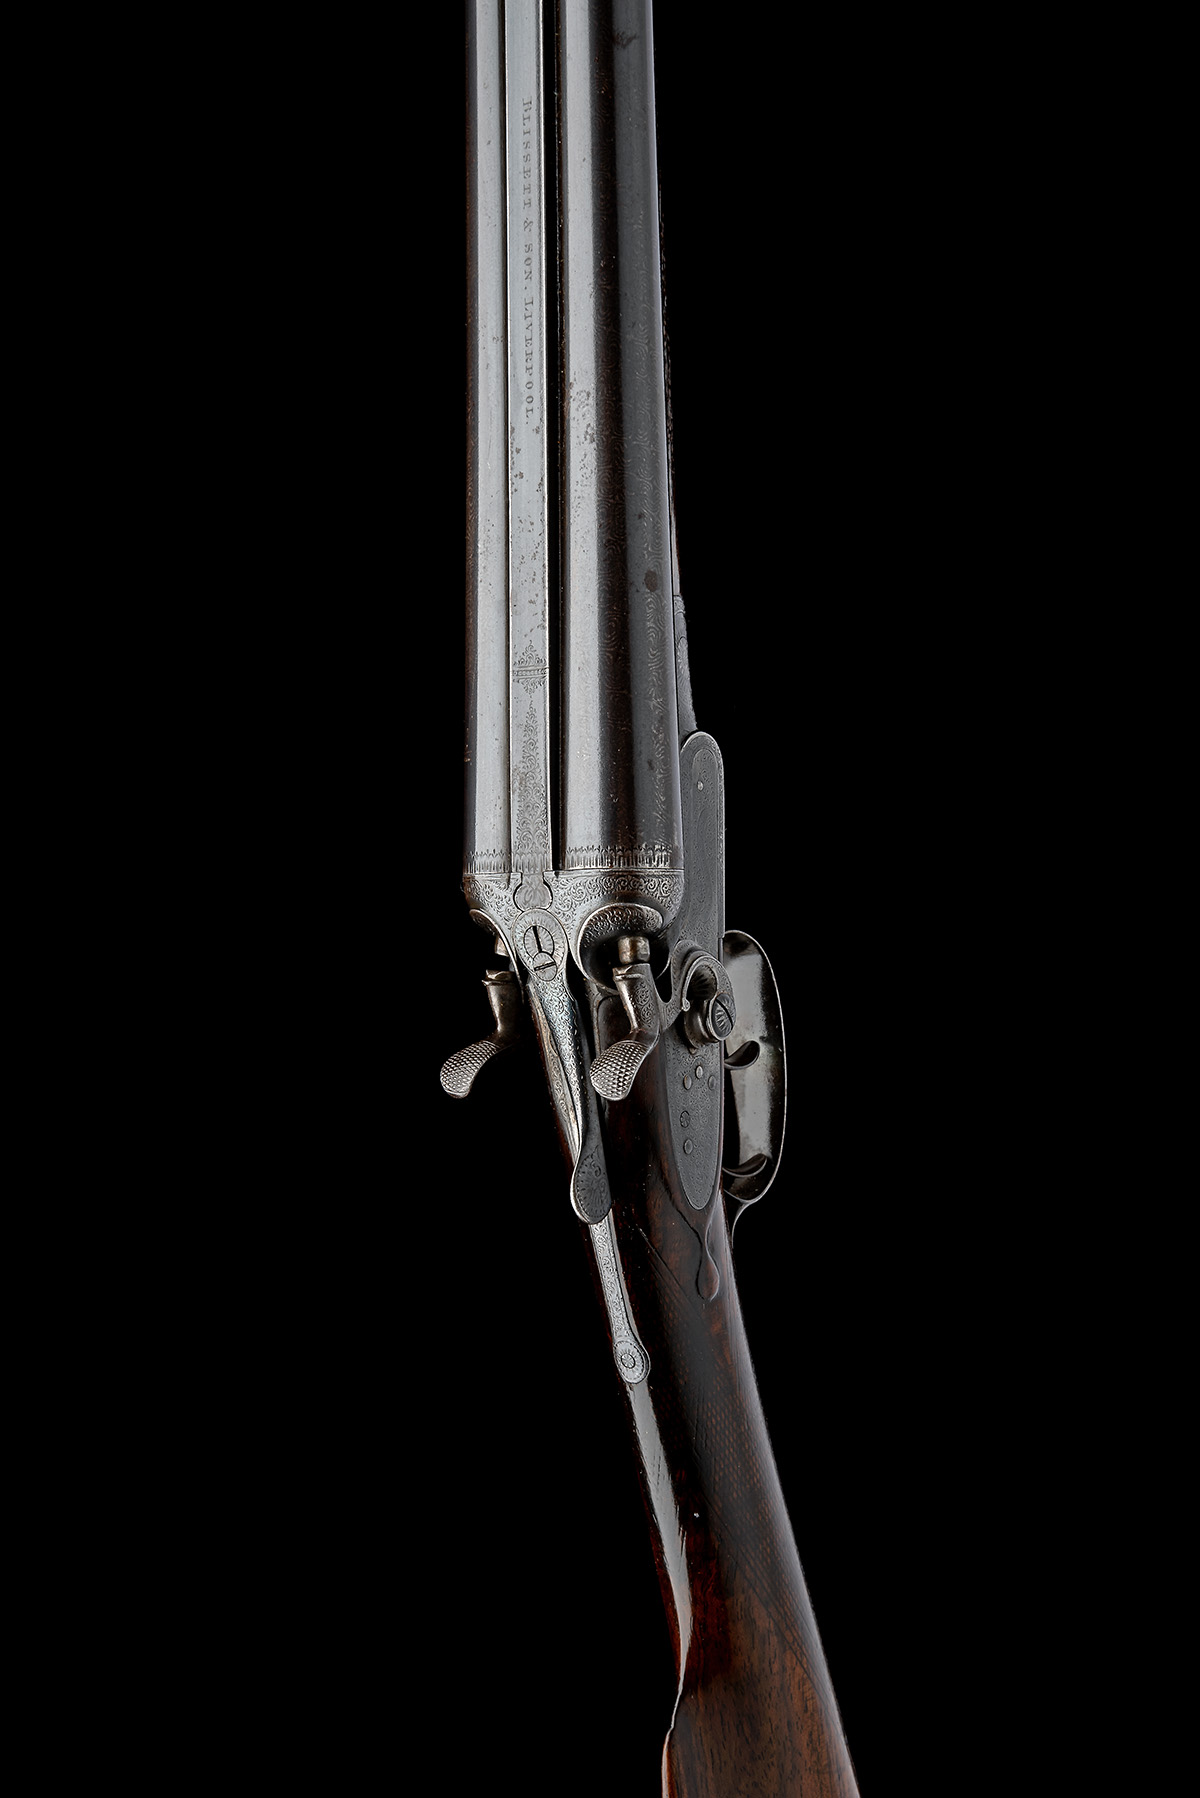 BLISSETT & SON A 28-BORE (3IN.) DOUBLE-BARRELLED TOPLEVER HAMMERGUN, serial no. 6004, circa 1880, - Image 4 of 9